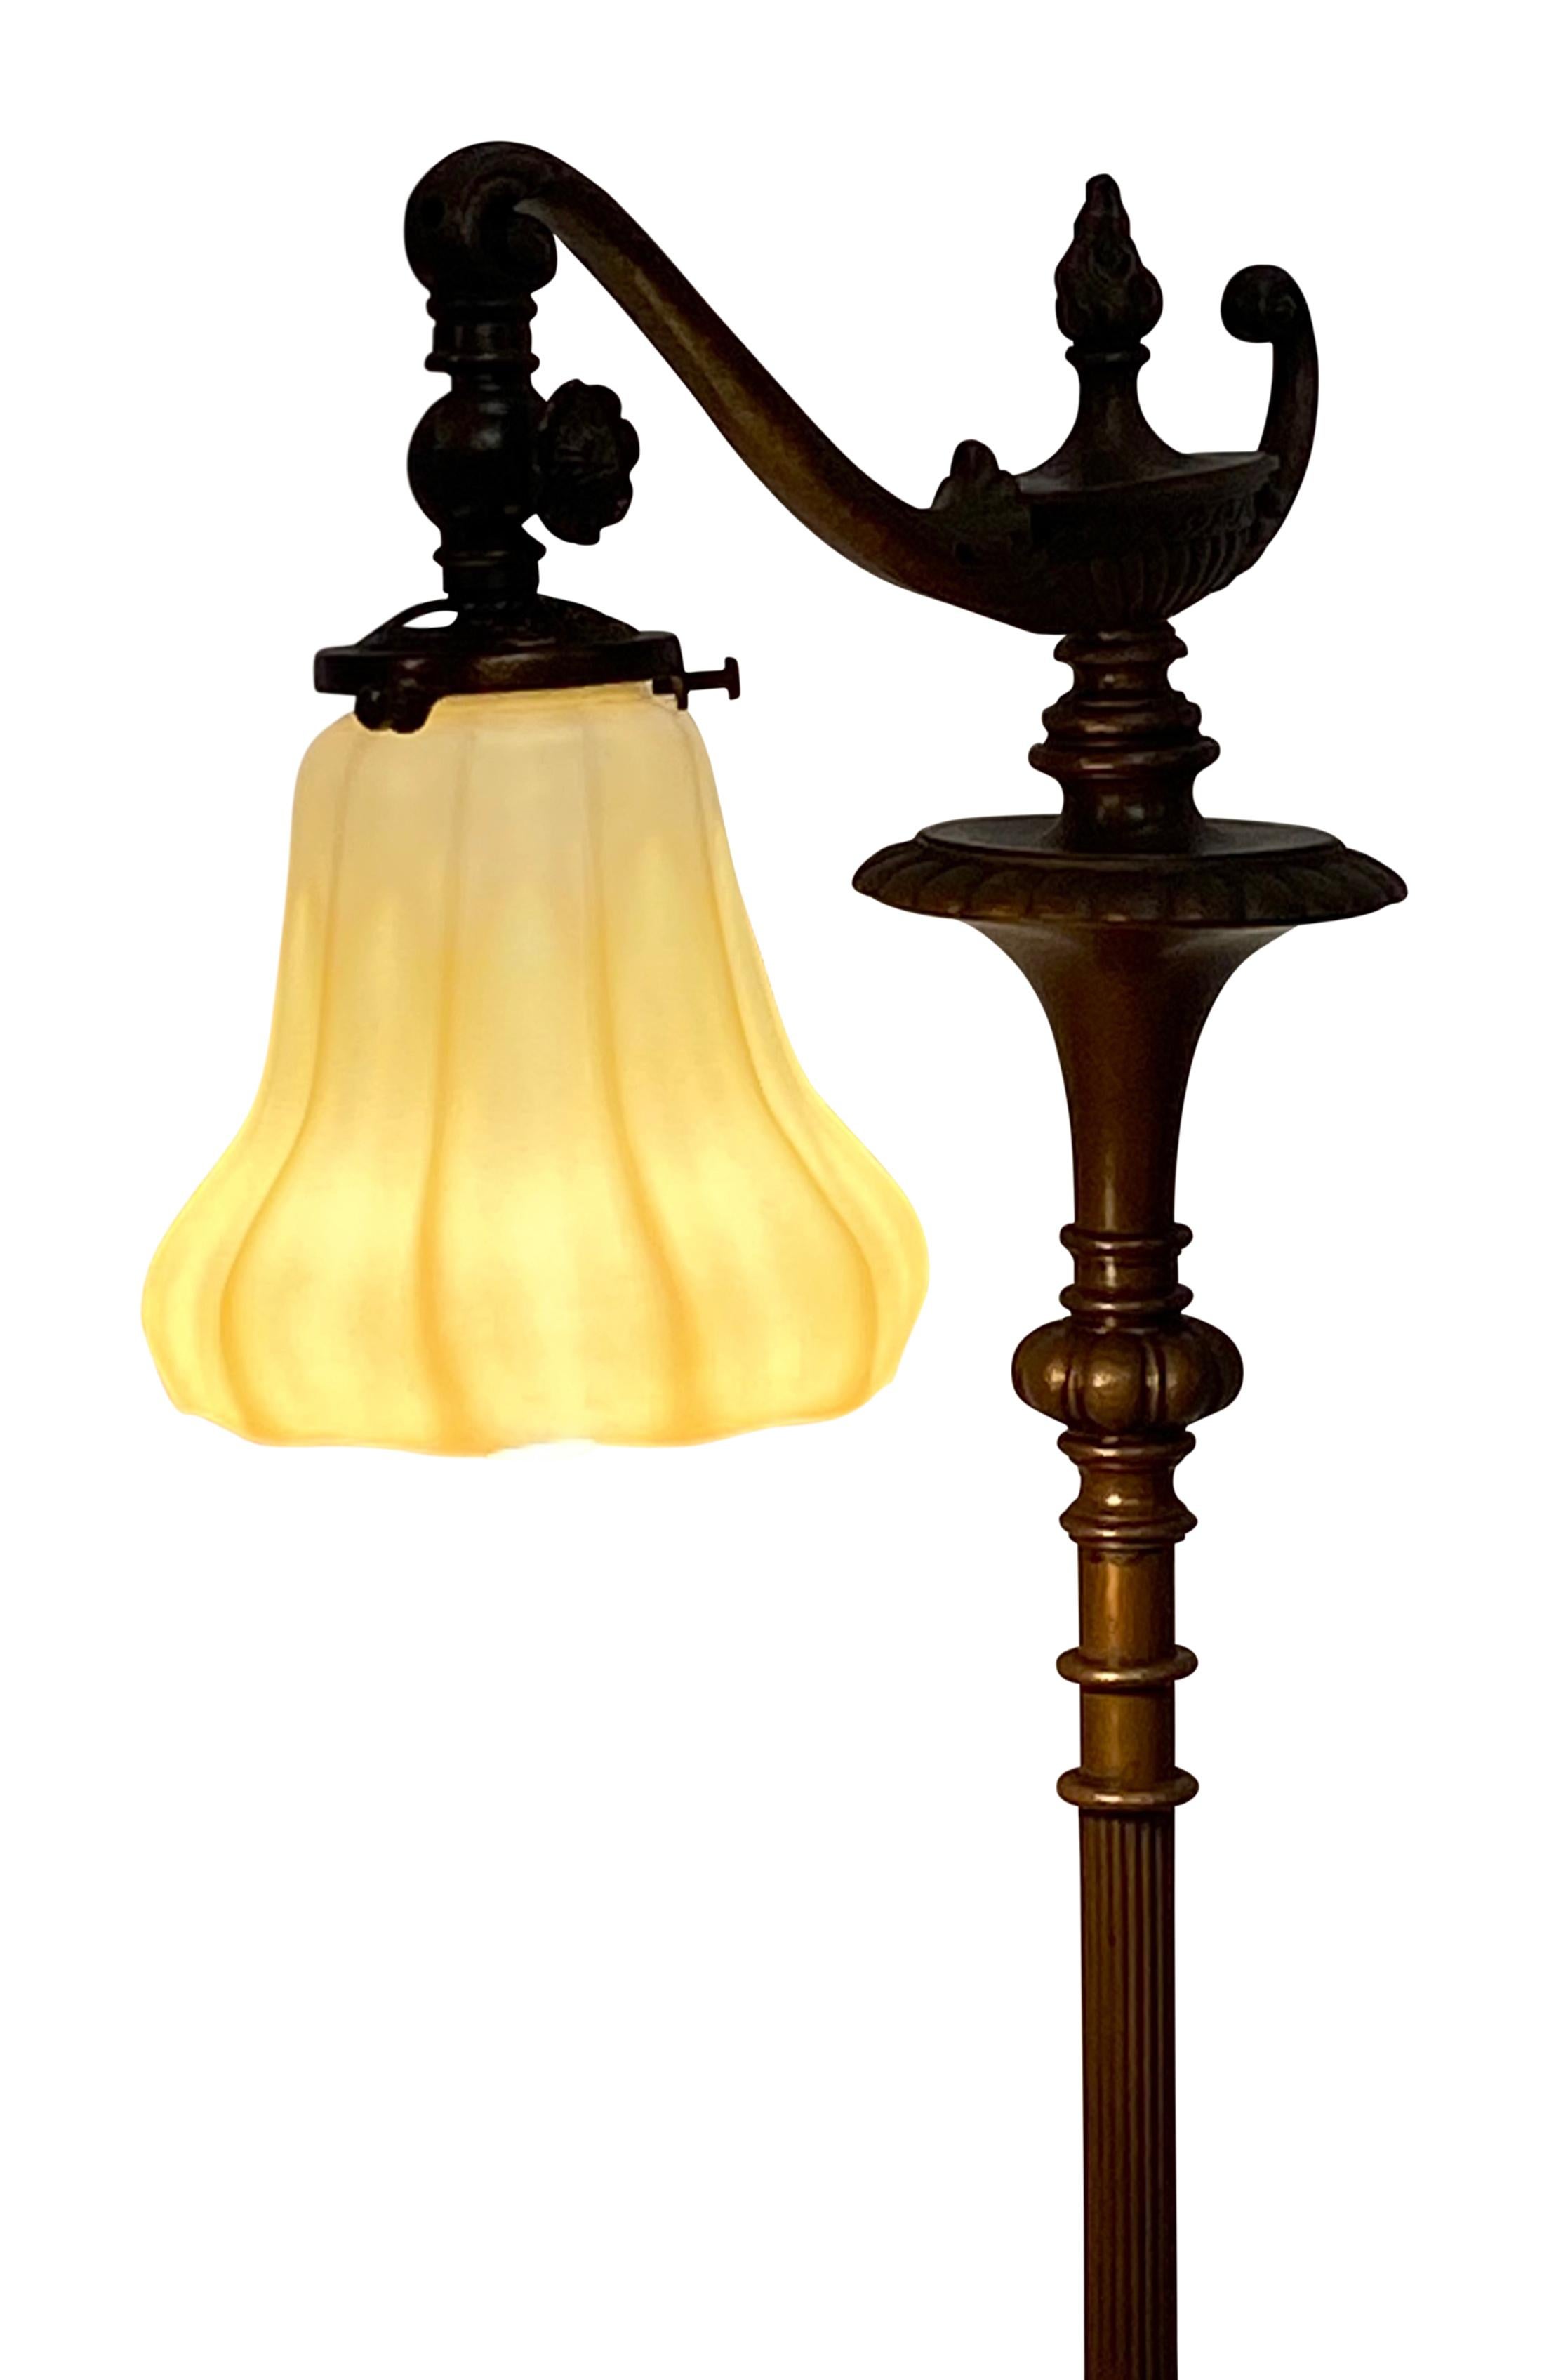 20th Century Bronze Floor Lamp with Antique Art Glass Shade, American, 1920s For Sale